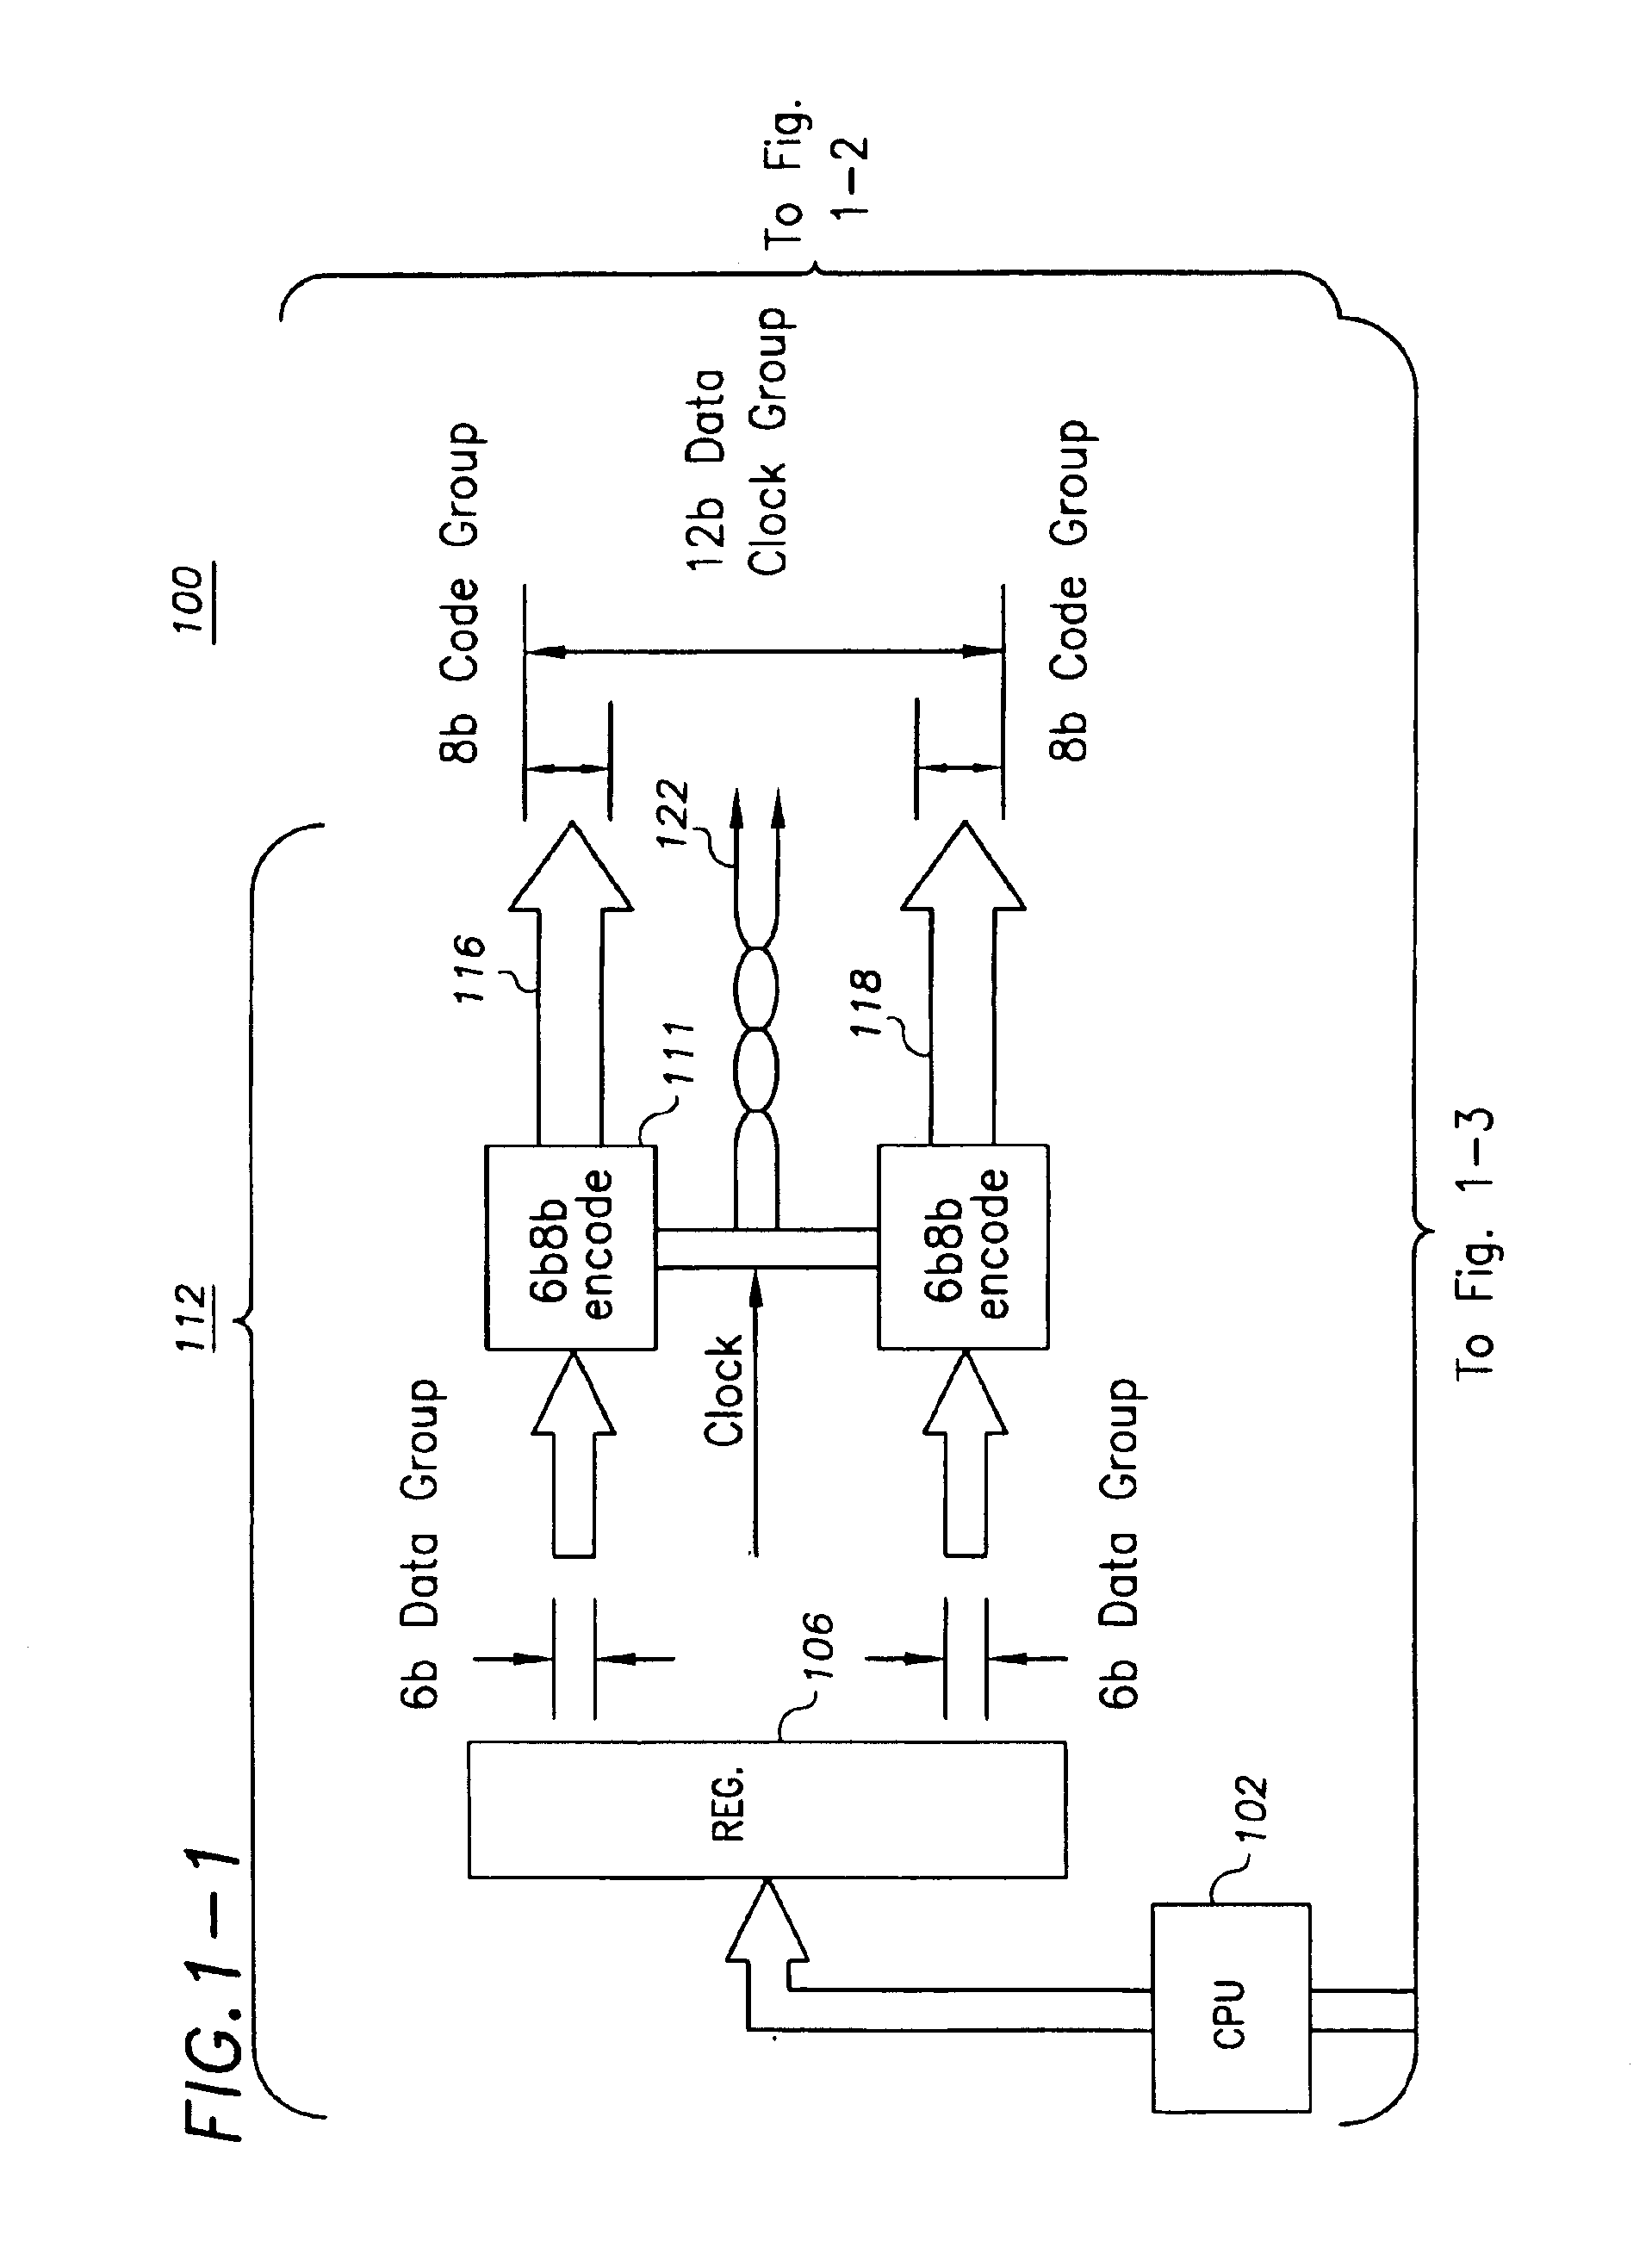 Parallel data communication realignment of data sent in multiple groups